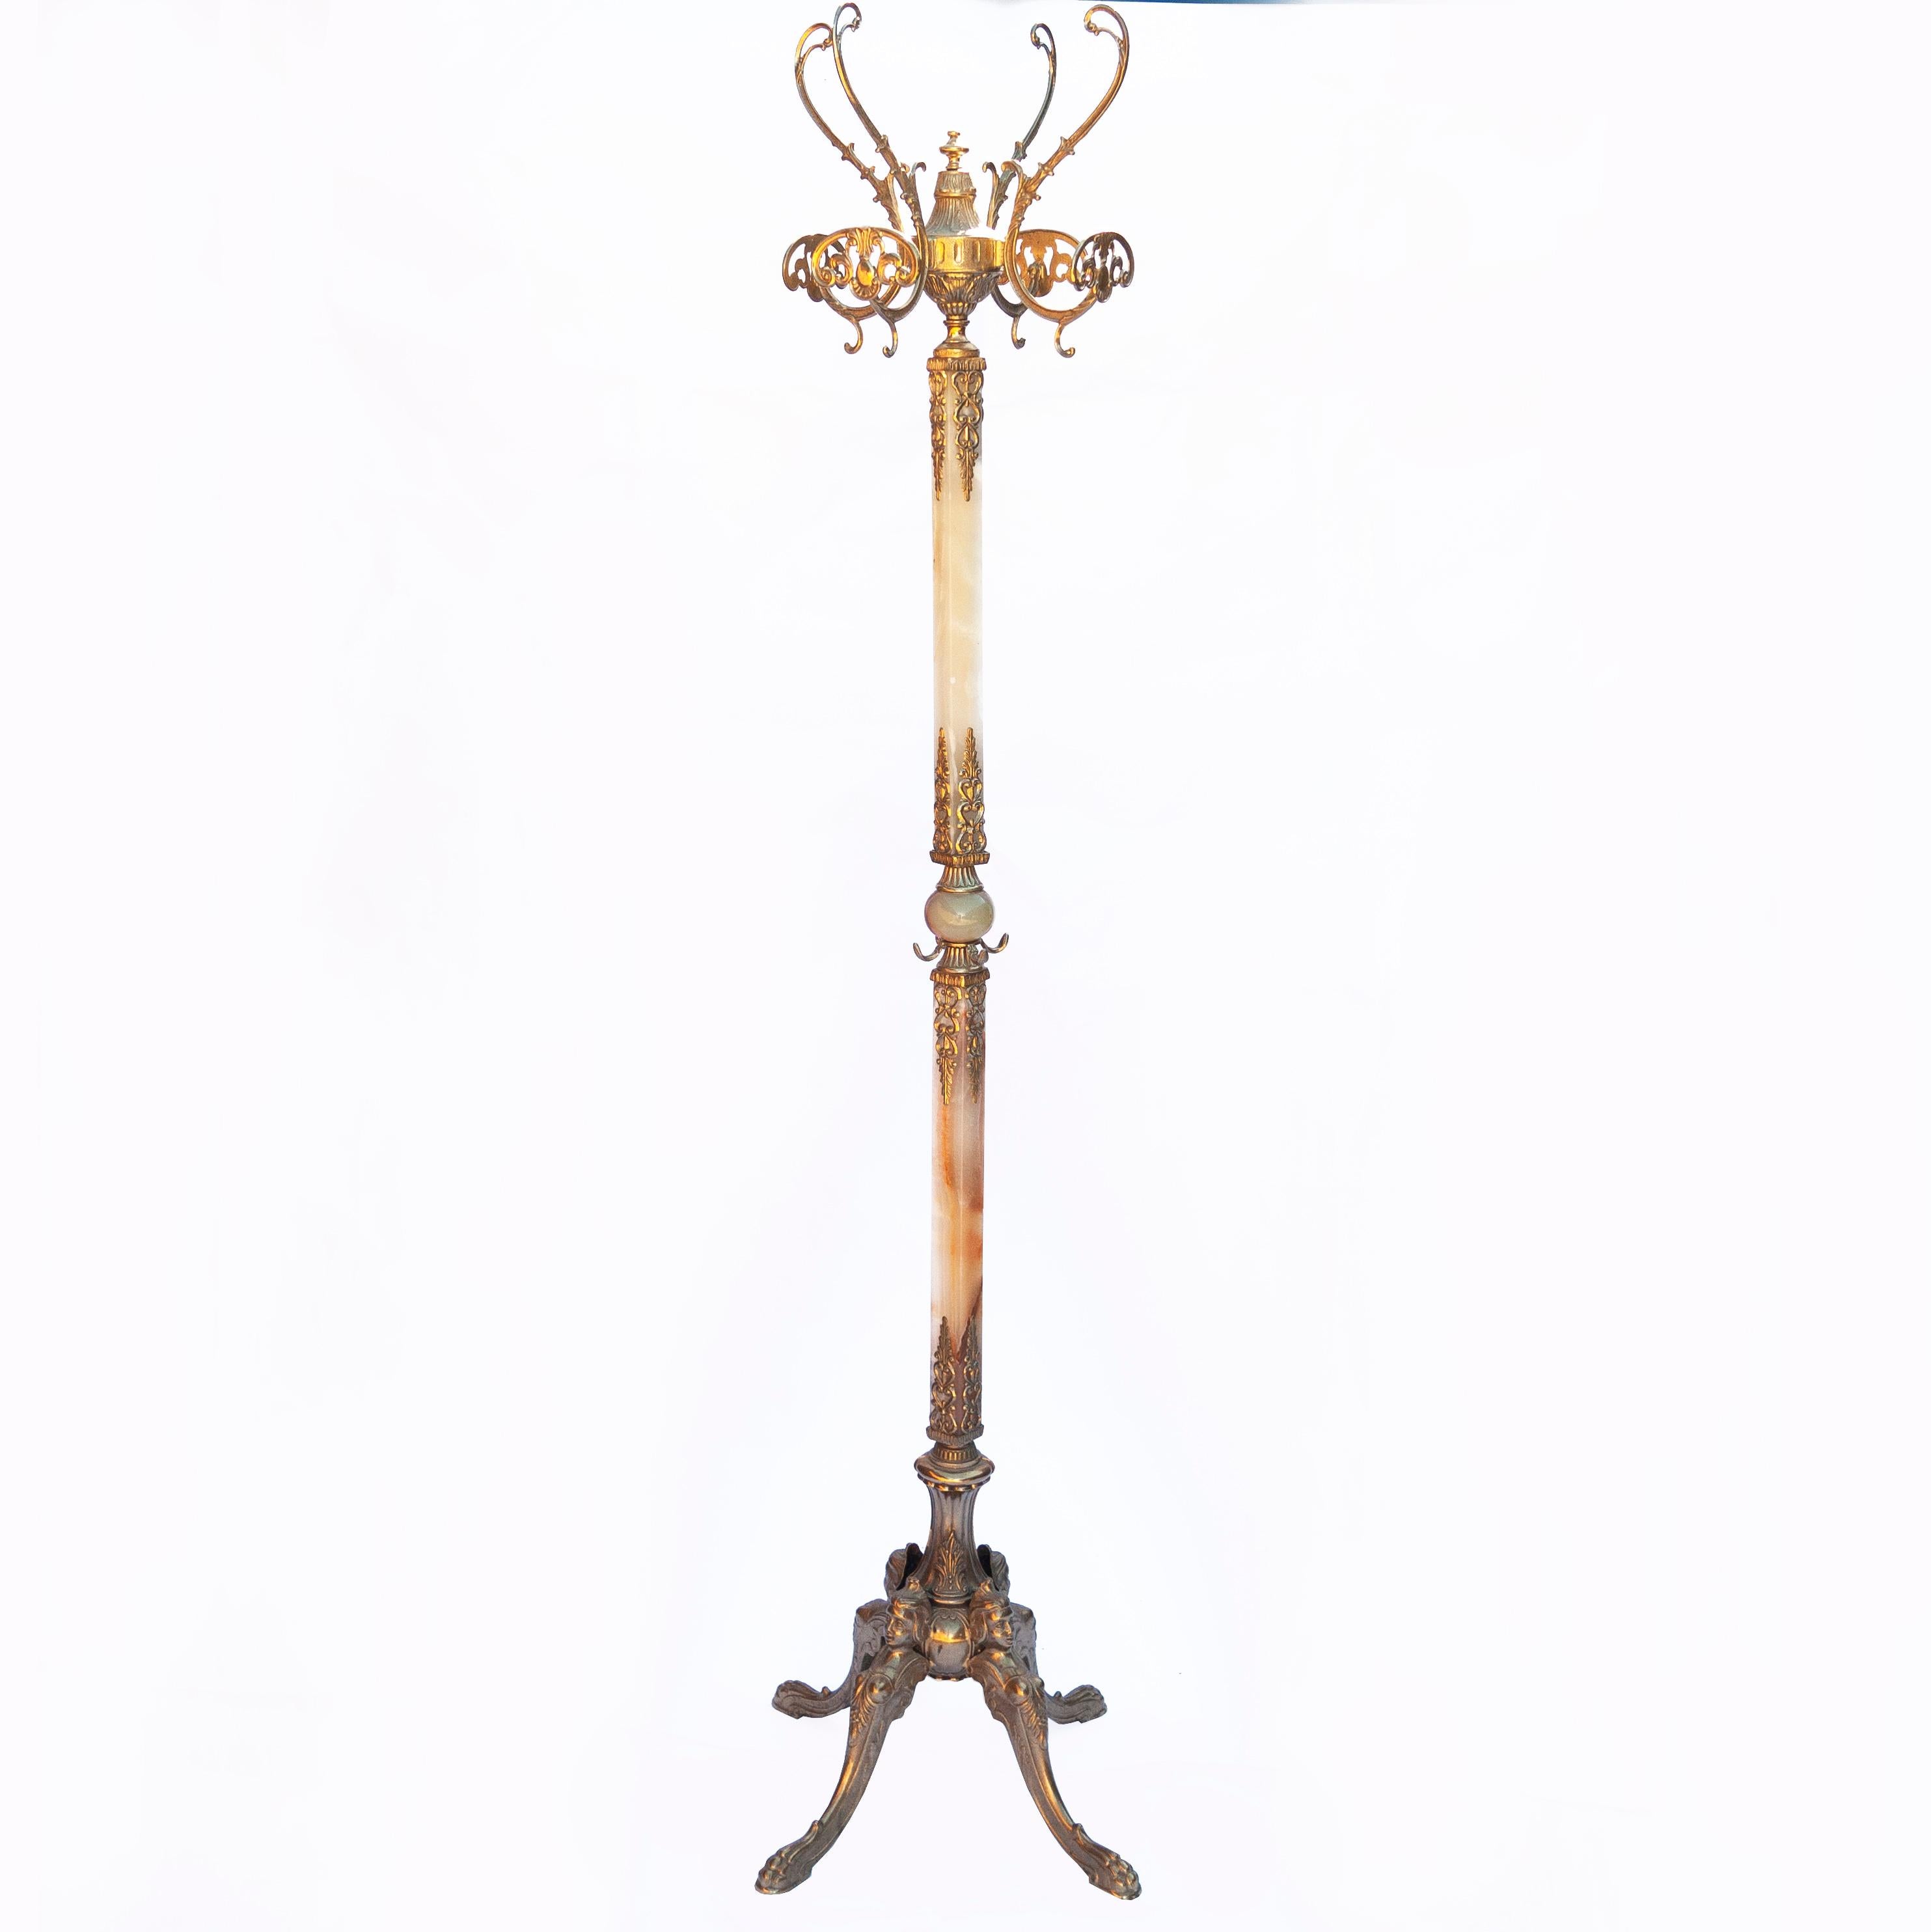 An Italian ornate brass coat rack with decorated brass details and onyx marble.

Designer - Unknown

Design Period - 1950 to 1959

Country of Manufacture - Italy

Style - Vintage

Detailed condition - good with minimal